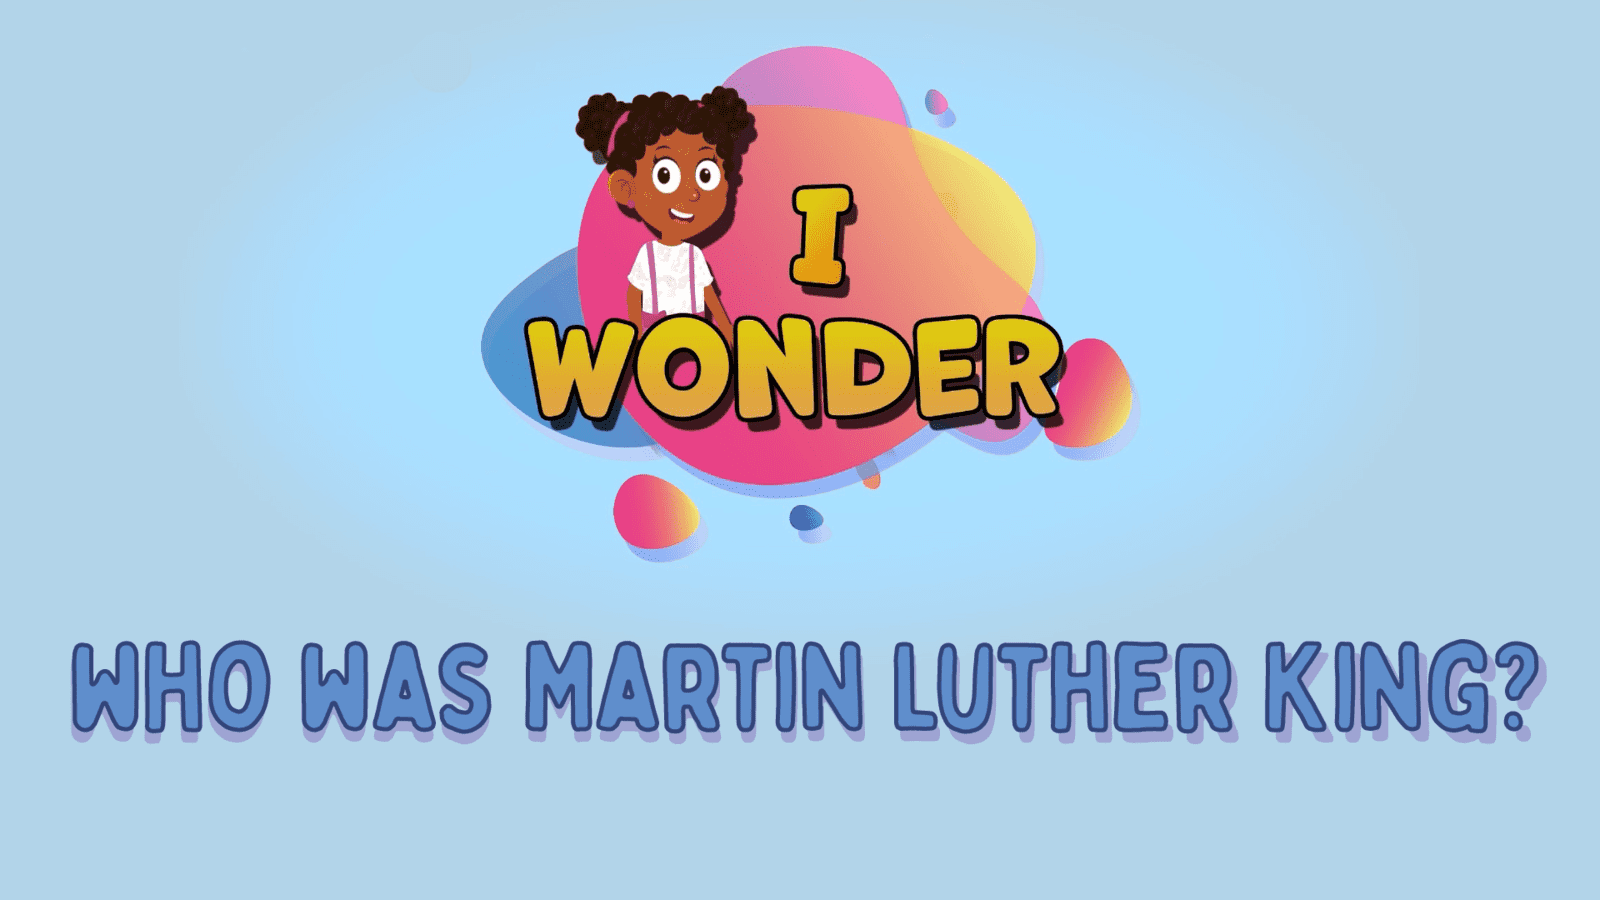 Who Was Martin Luther King?